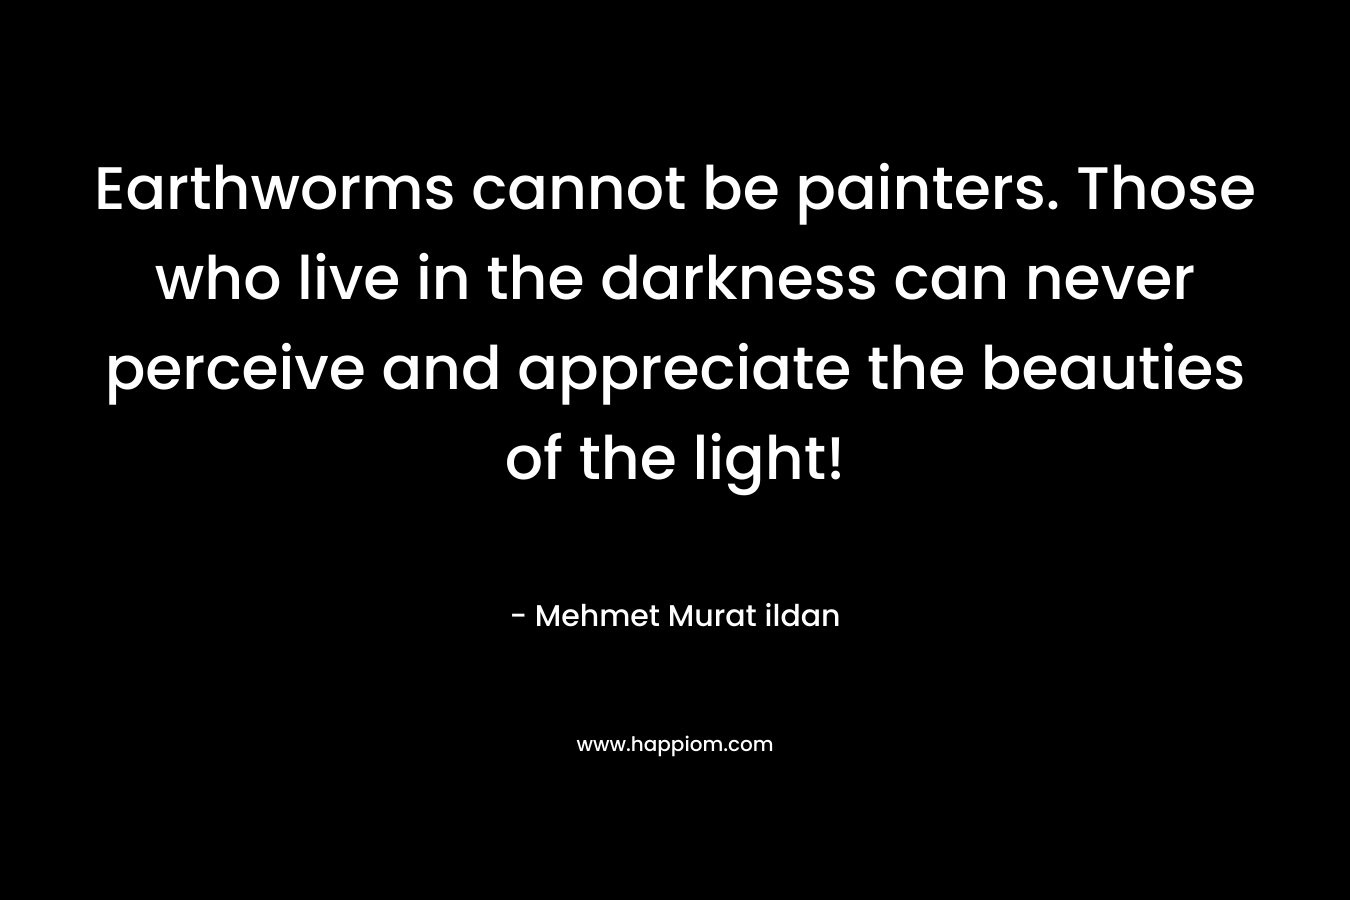 Earthworms cannot be painters. Those who live in the darkness can never perceive and appreciate the beauties of the light!